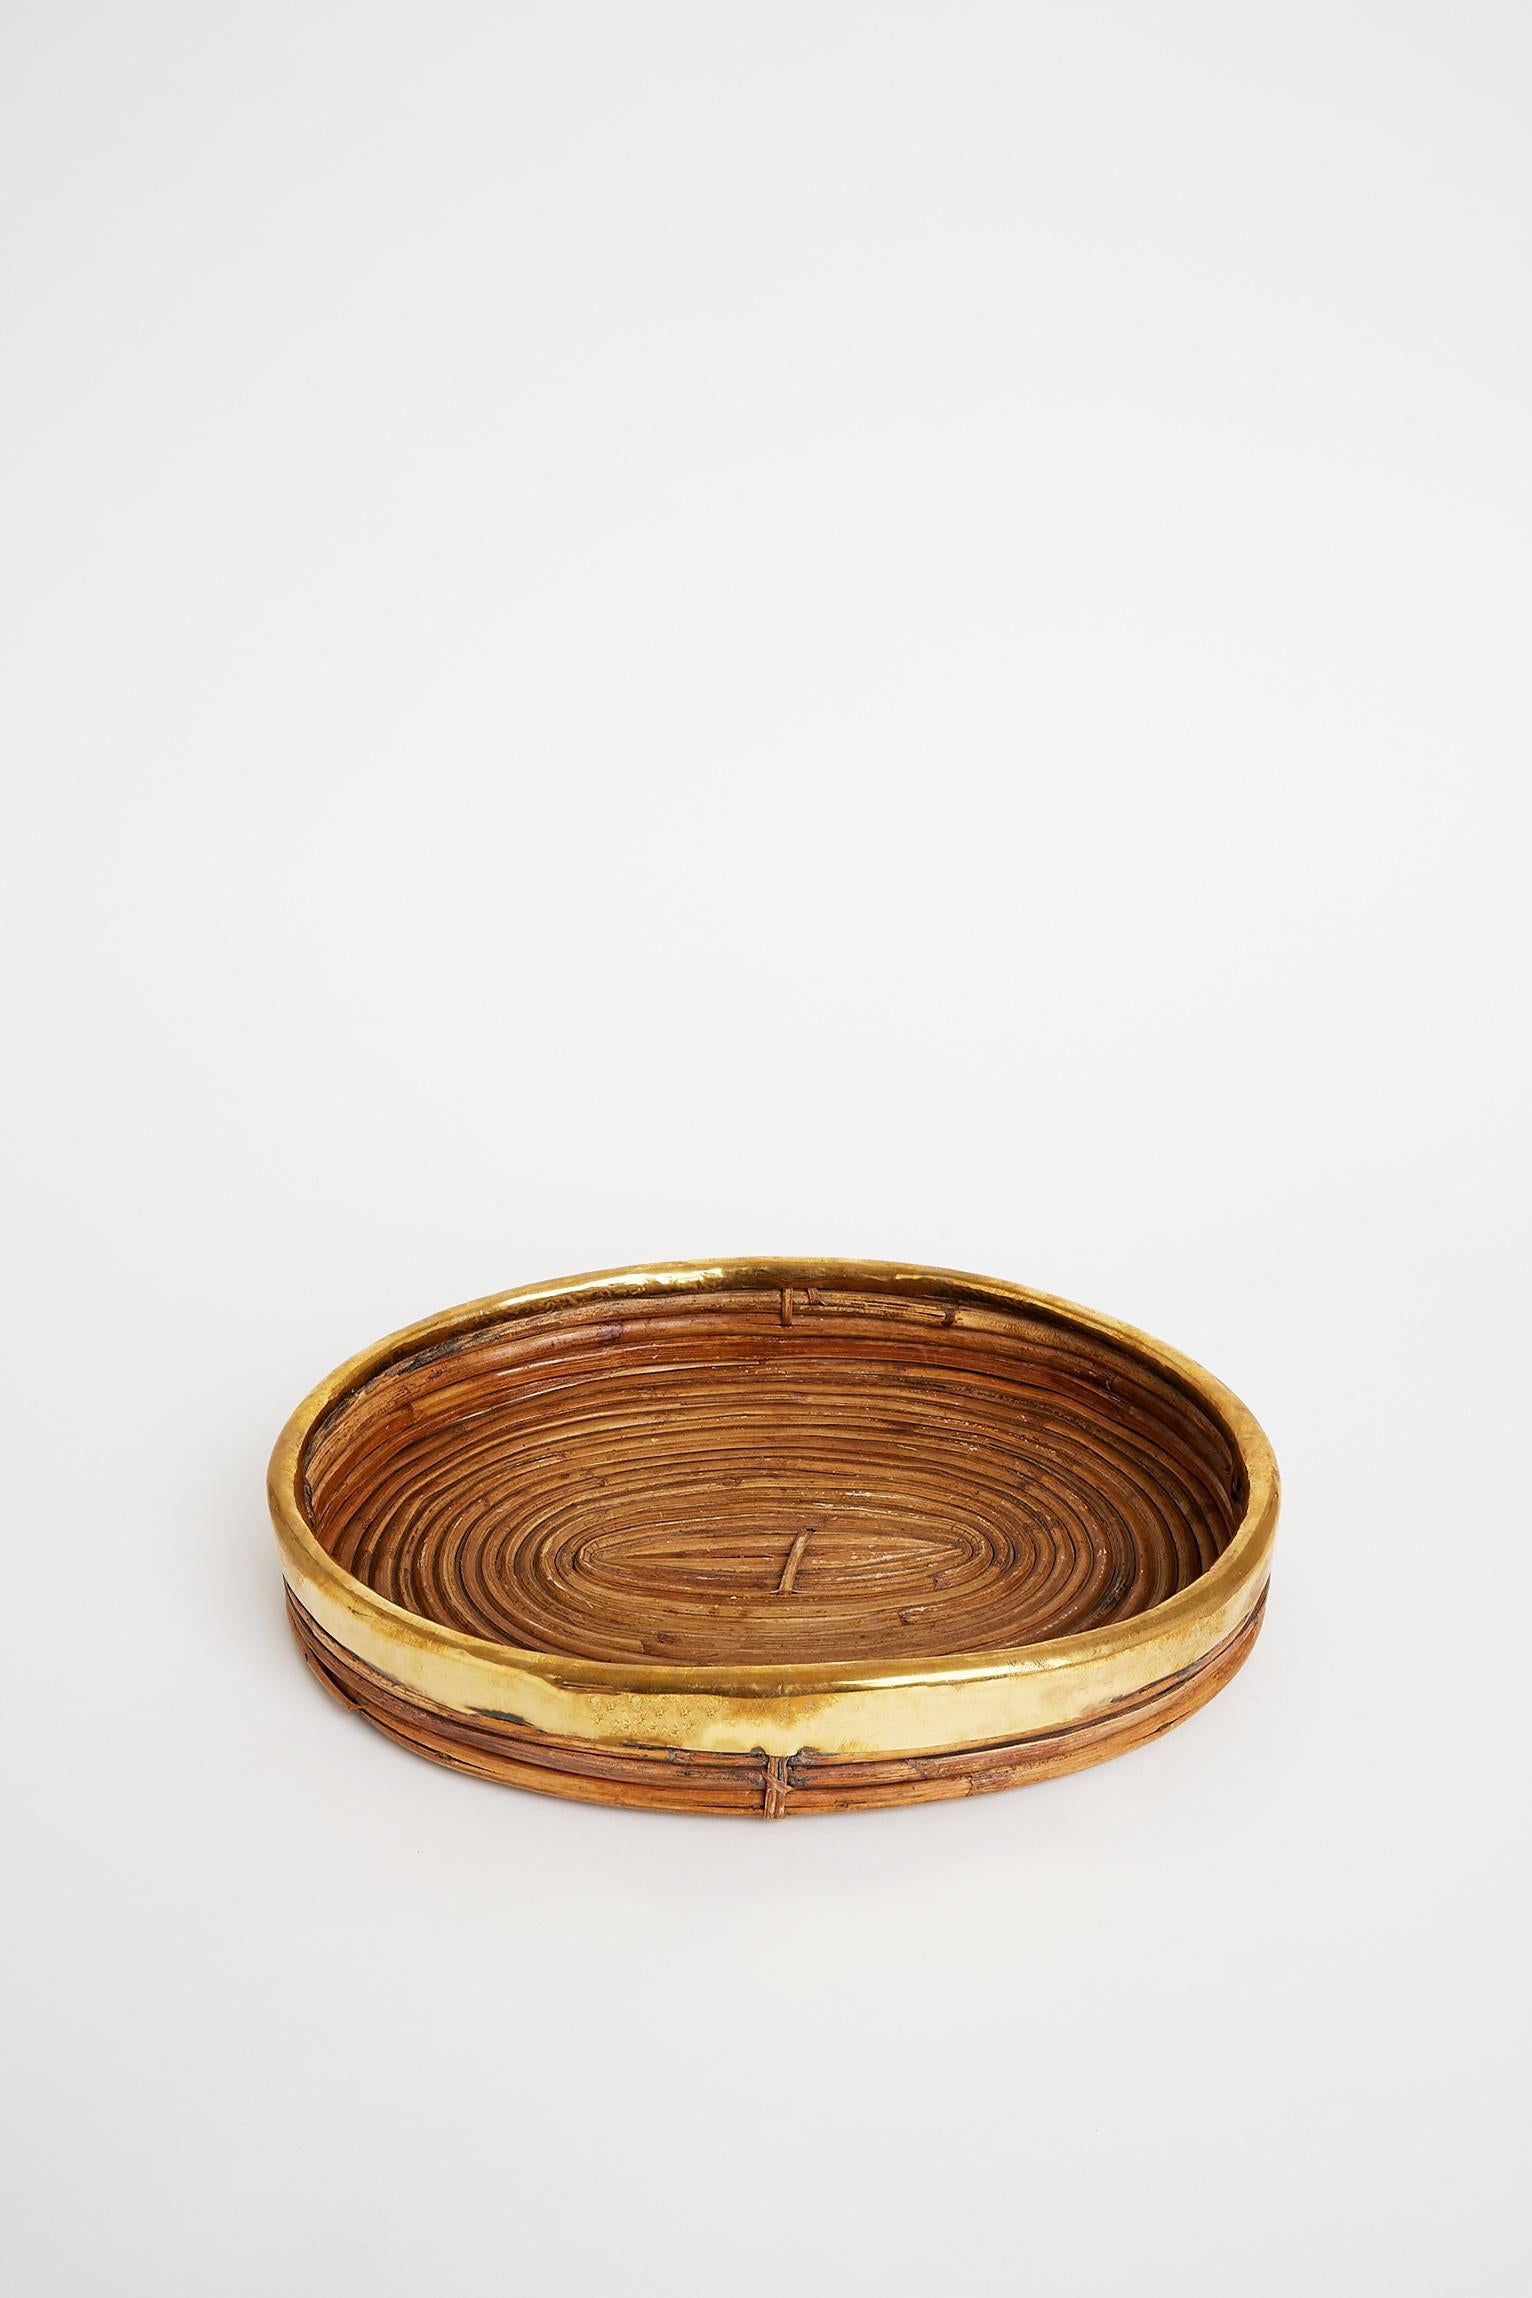 A brass and reed oval tray, in the manner of Gabriella Crespi.
Italy, circa 1970.